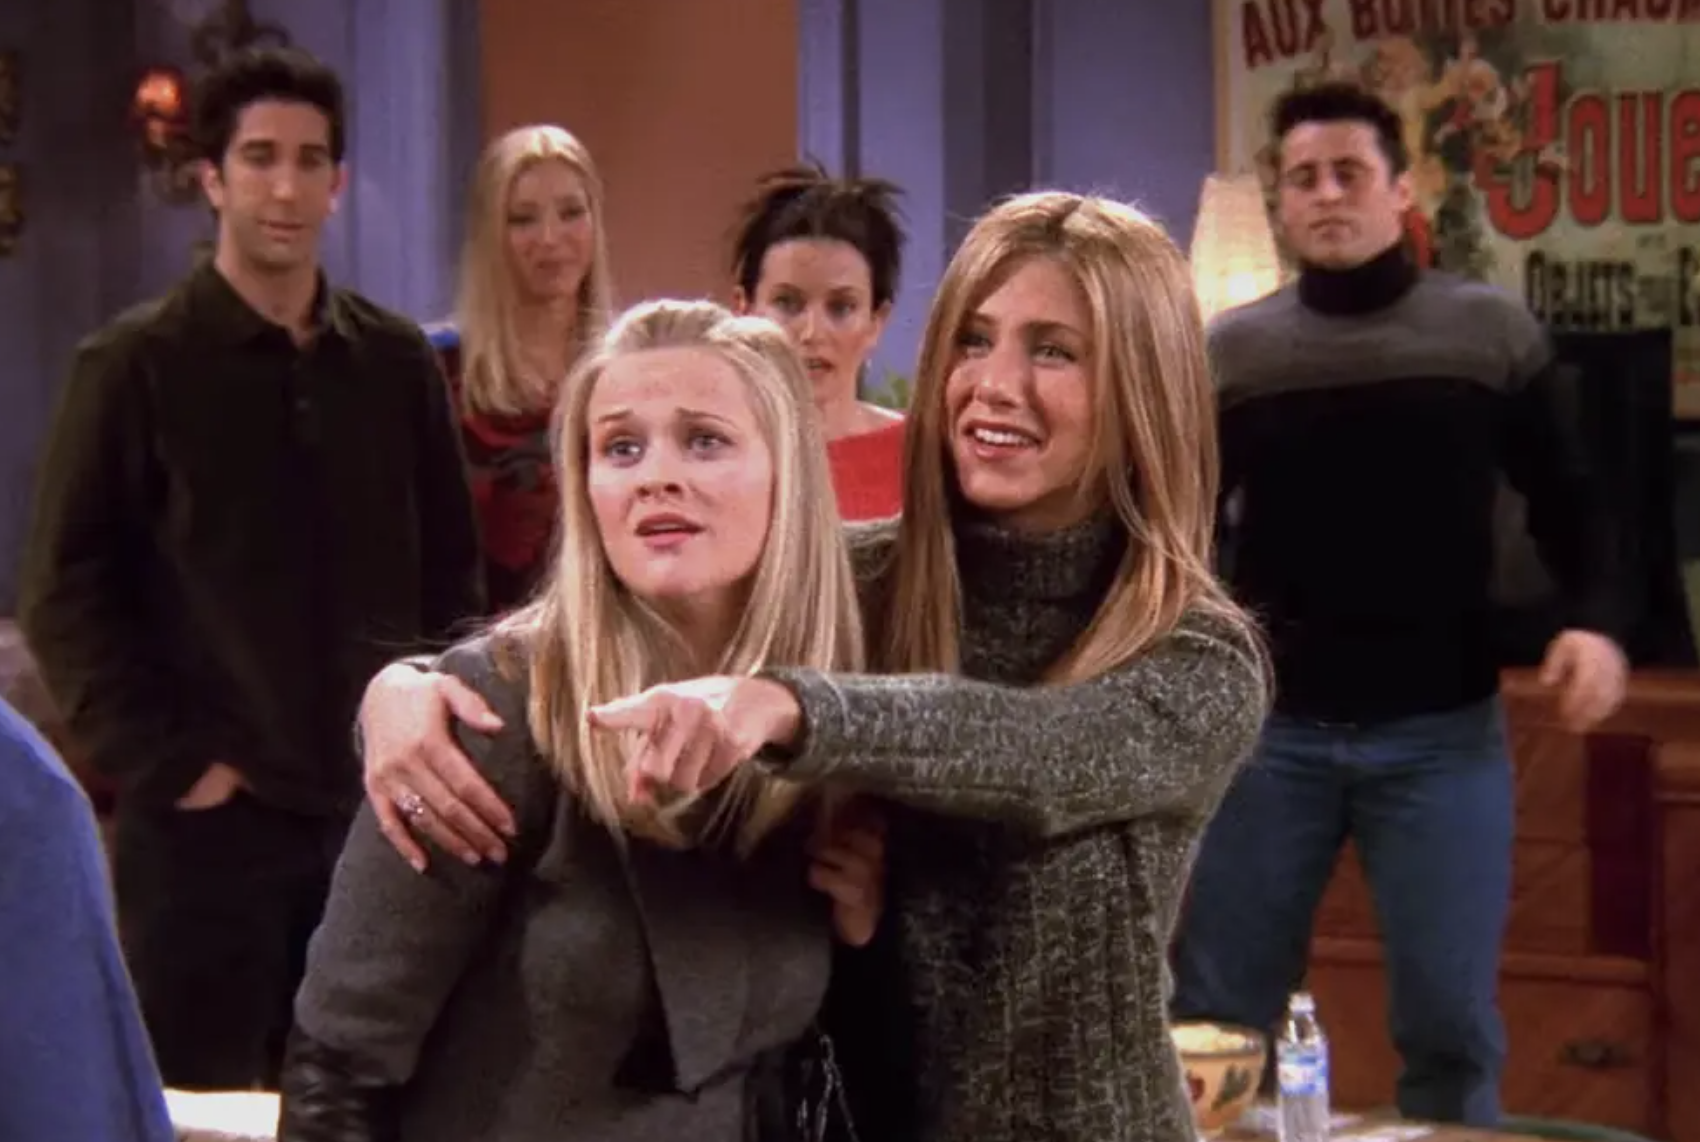 Reese Witherspoon And Jennifer Aniston Reenacted One Of Their Best “Friends” Scenes